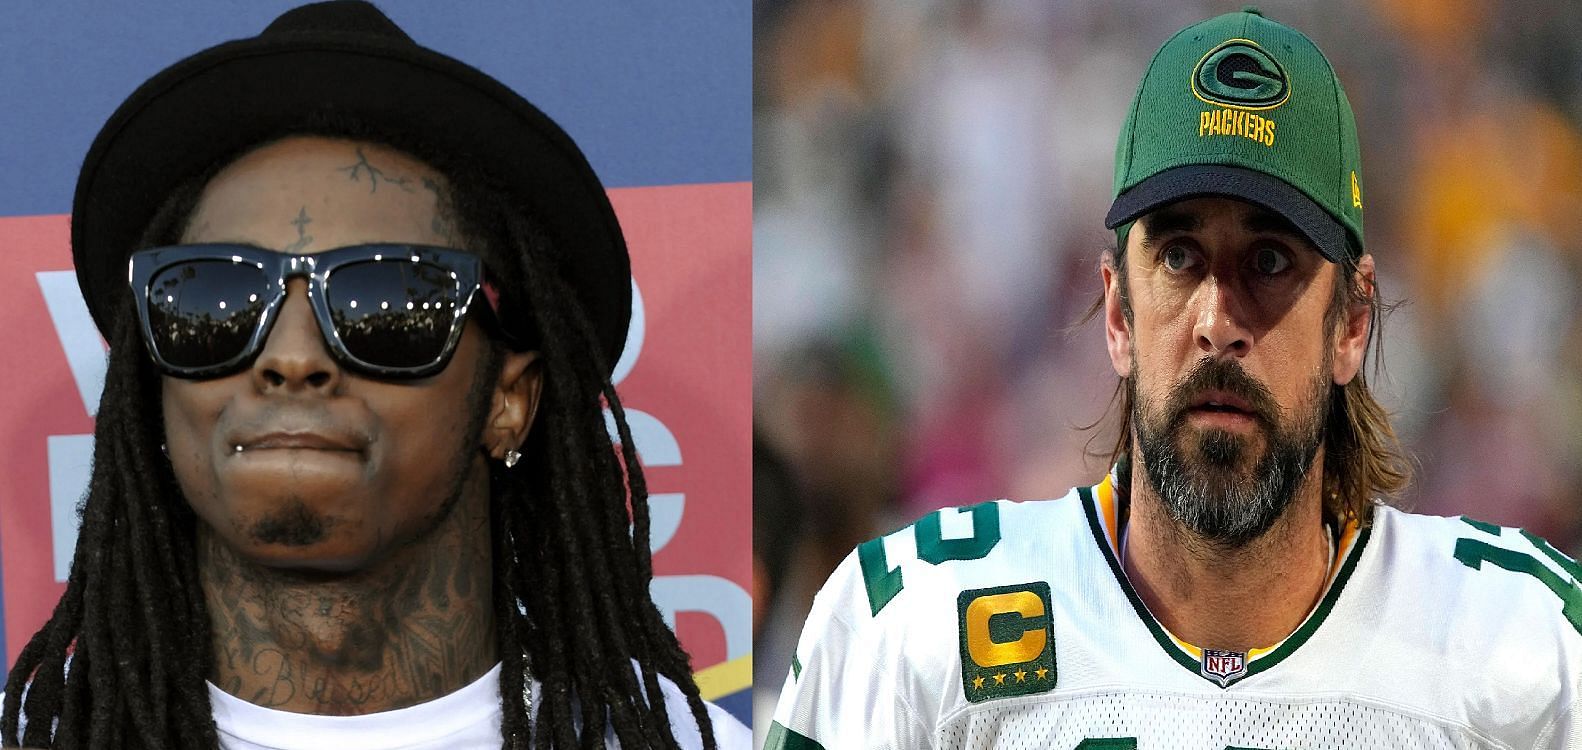 Lil Wayne (Left) and Aaron Rodgers (Right)